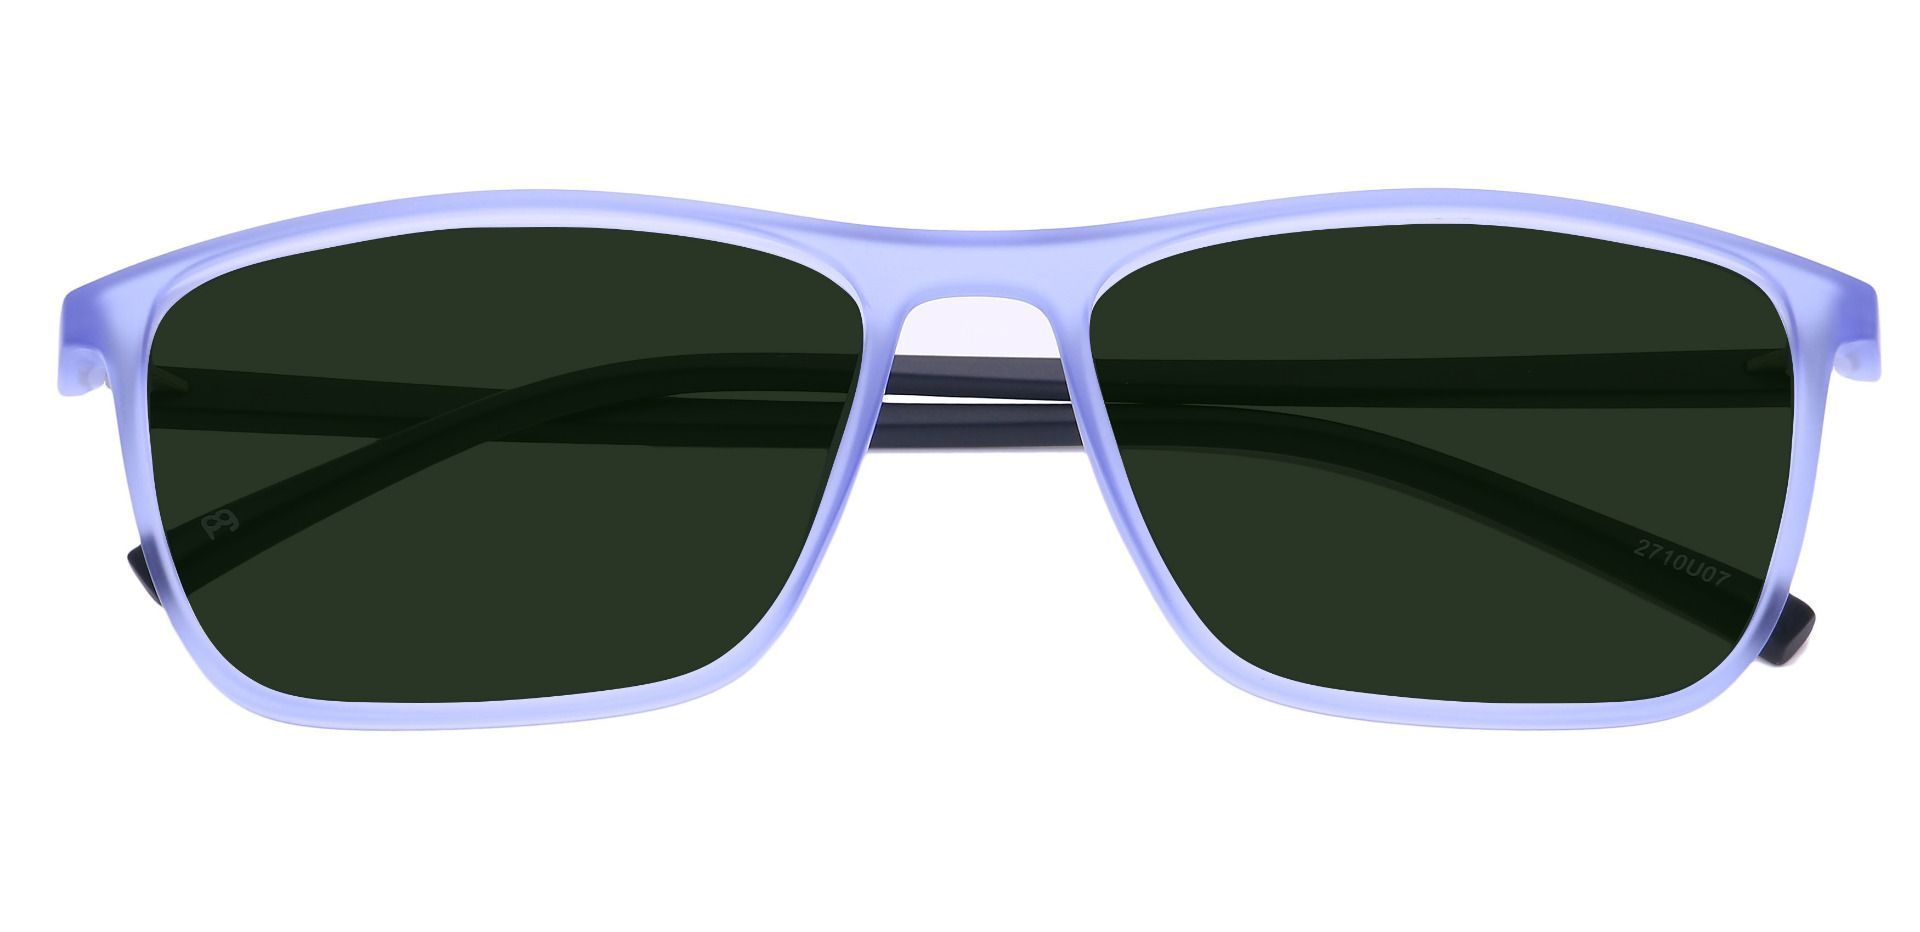 Candid Rectangle Prescription Sunglasses - Blue Frame With Green Lenses